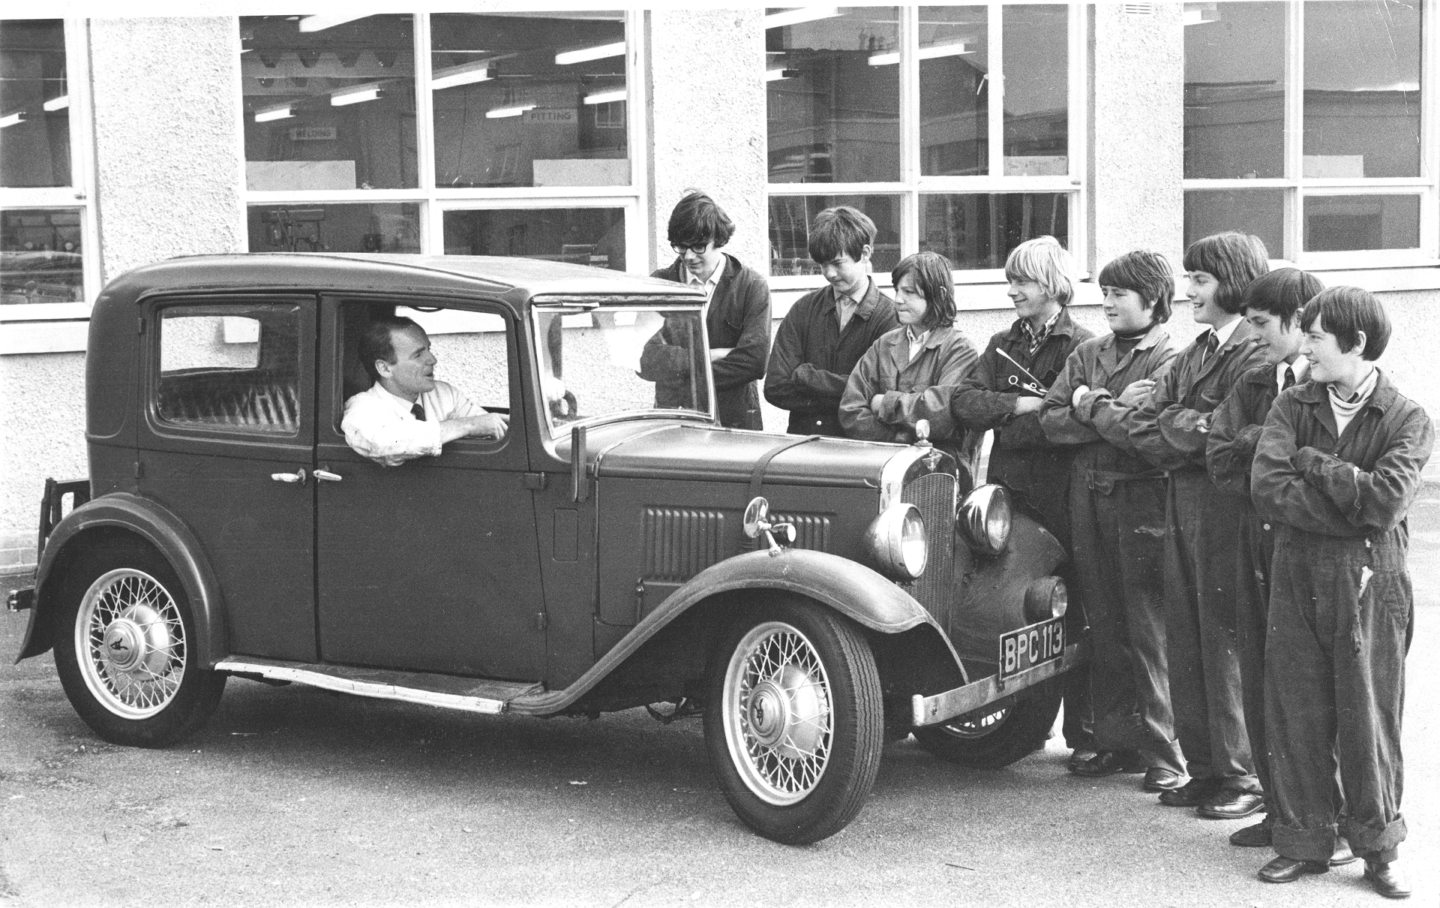 Salome the car, as she was affectionately called by Summerhill pupils, and some of the lads who helped rebuild her over four months in 1971.